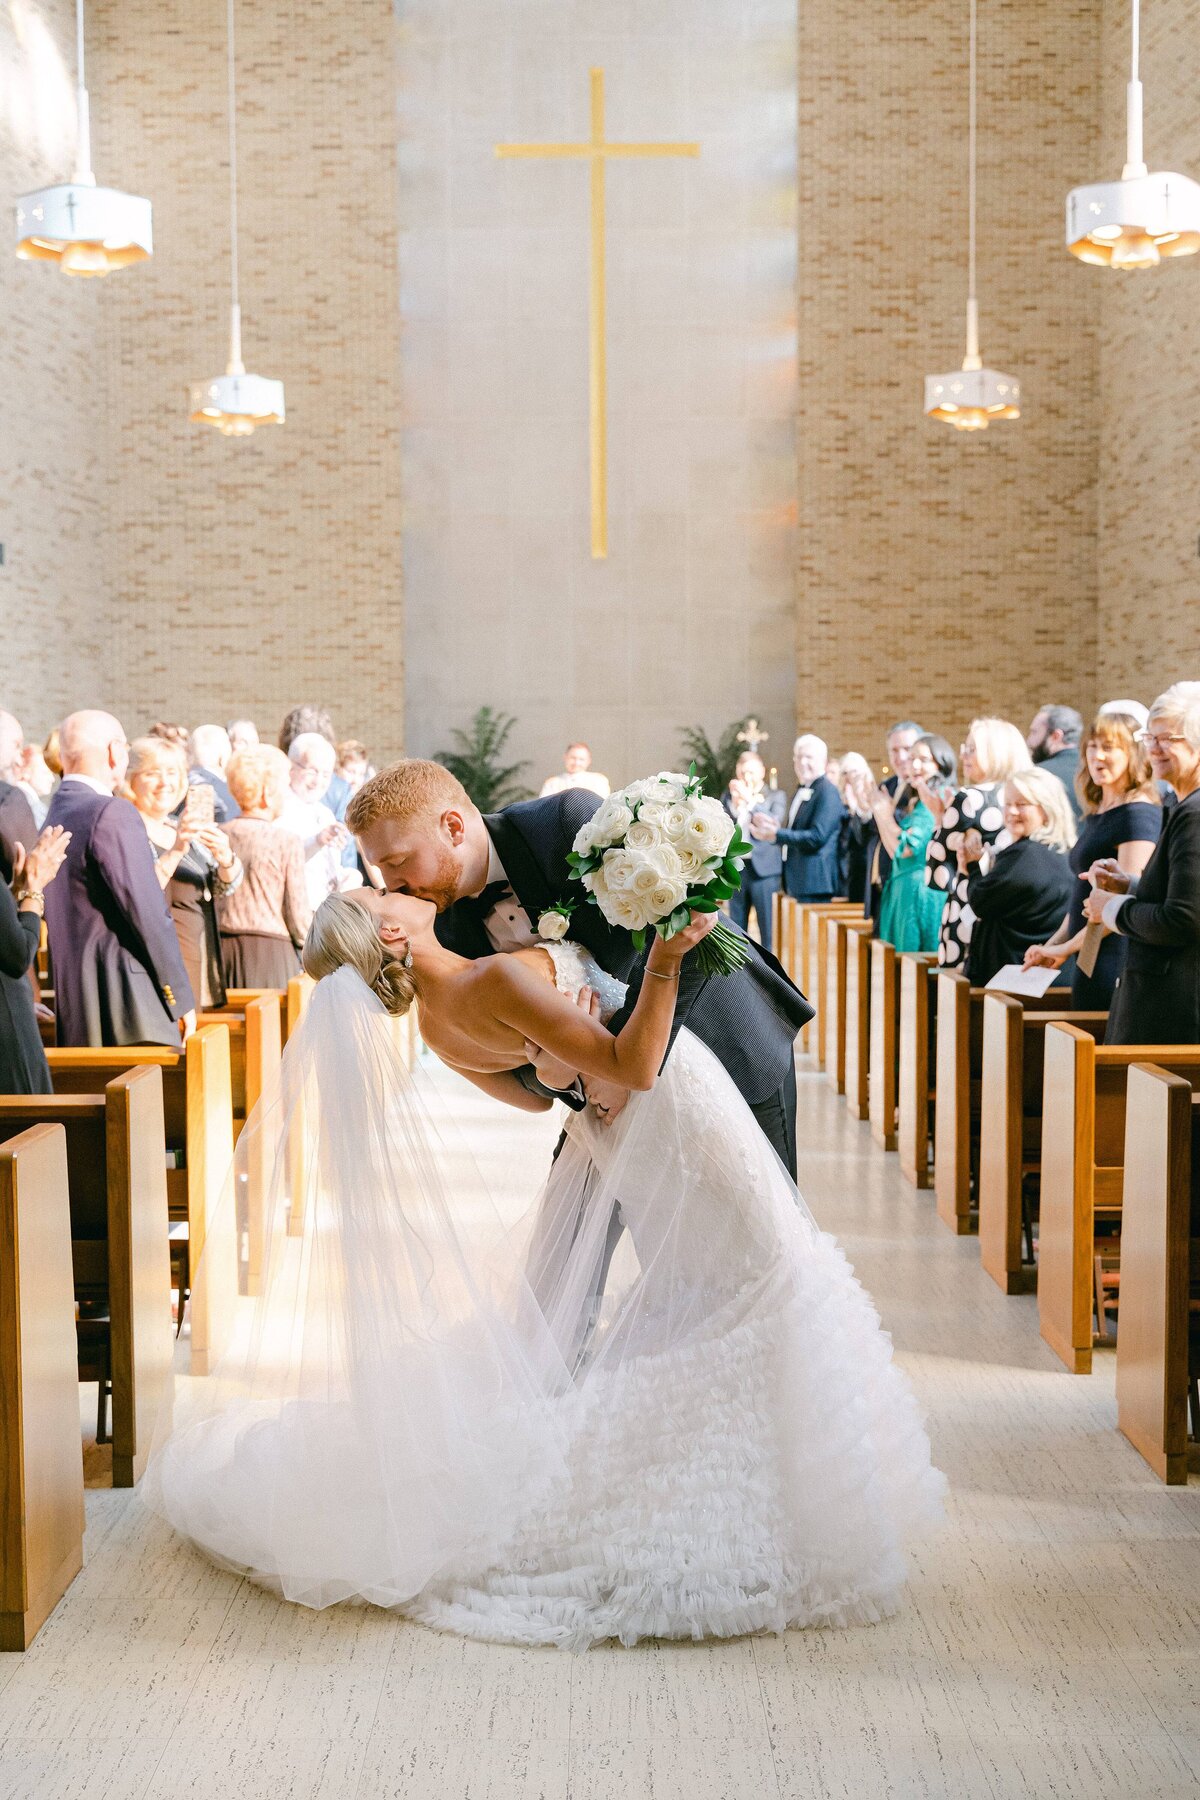 Bride and Groom's first kiss during their wedding ceremony at St Joseph Chapel at Holy Cross College in South Bend, Indiana